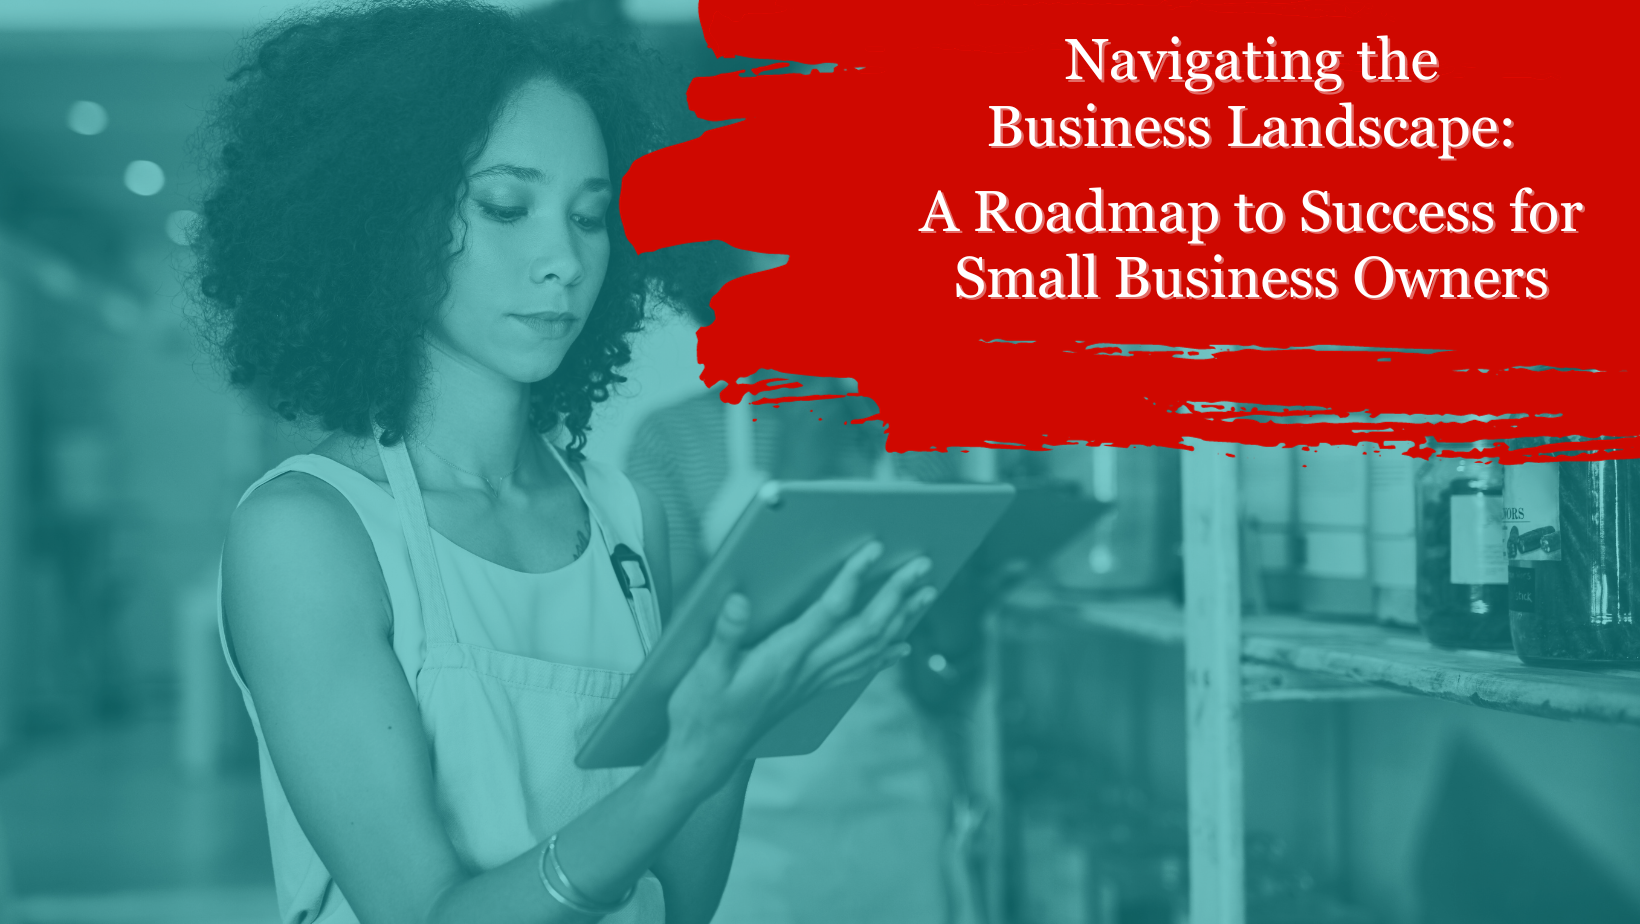 Navigating the Business Landscape: A Roadmap to Success for Small Business Owners